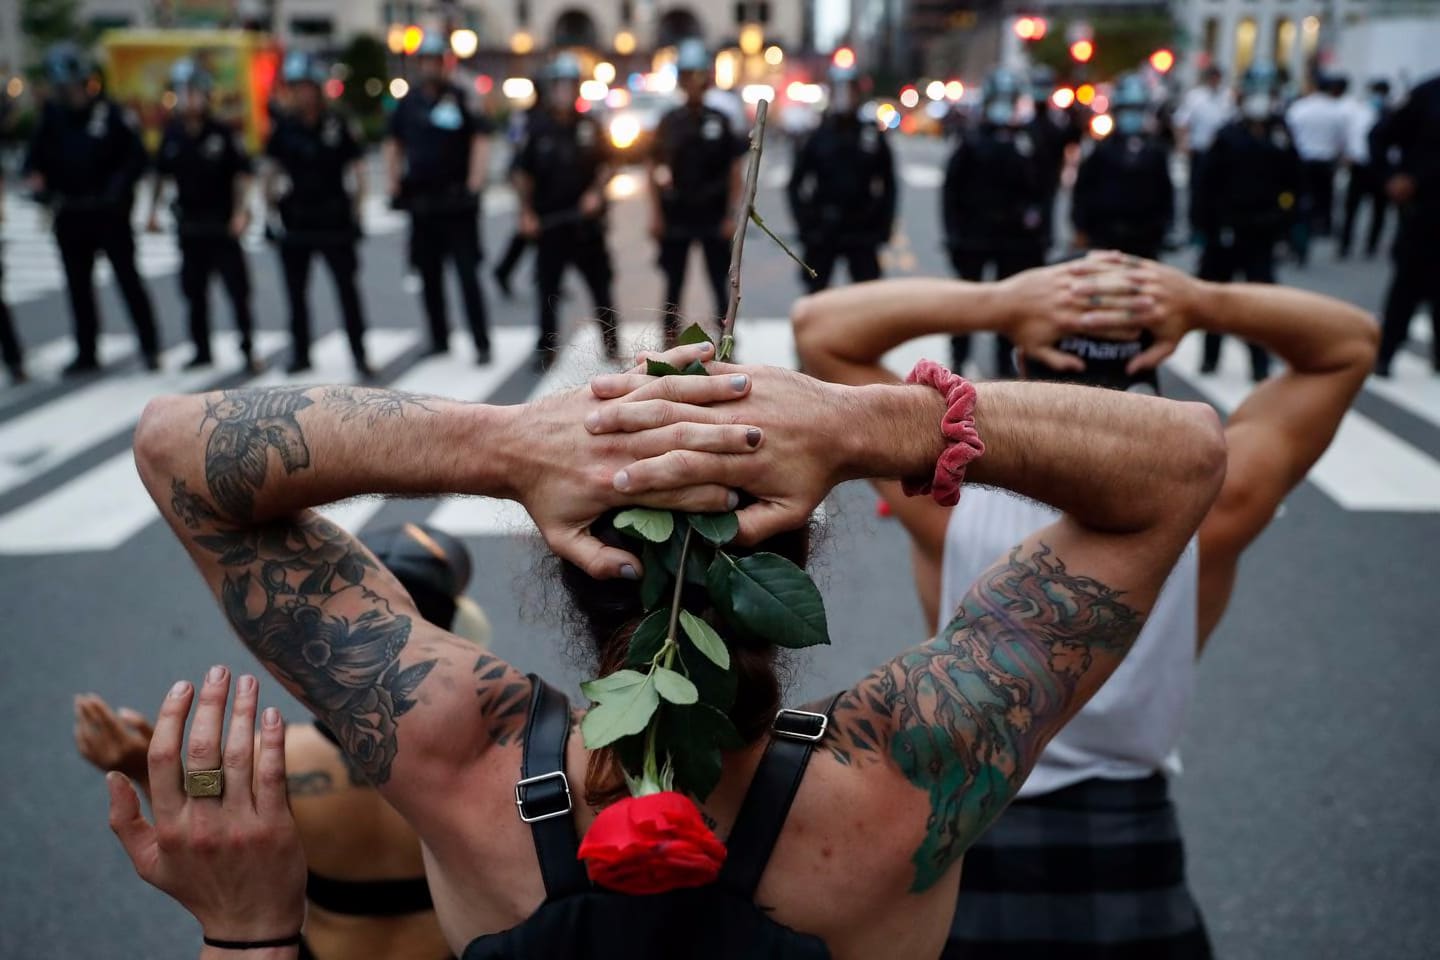 Protesters kneeled in front of New York City Police Department officers before being arrested for violating curfew beside the iconic Plaza Hotel on 59th Street on June 3, 2020 in New York.